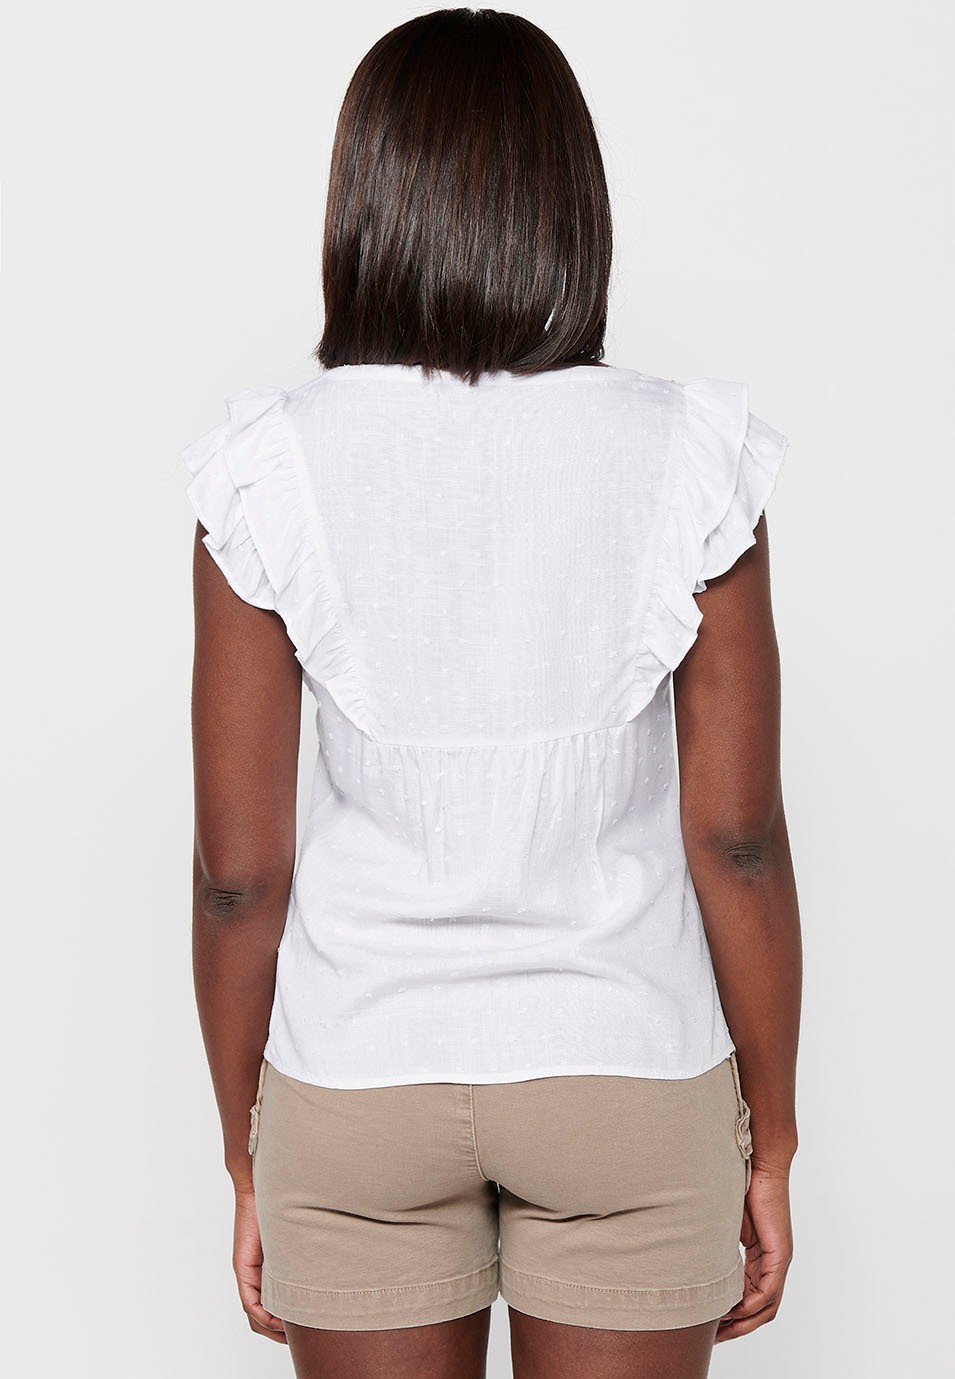 Blouse with short sleeve ruffle with front embroidery detail in White for Women